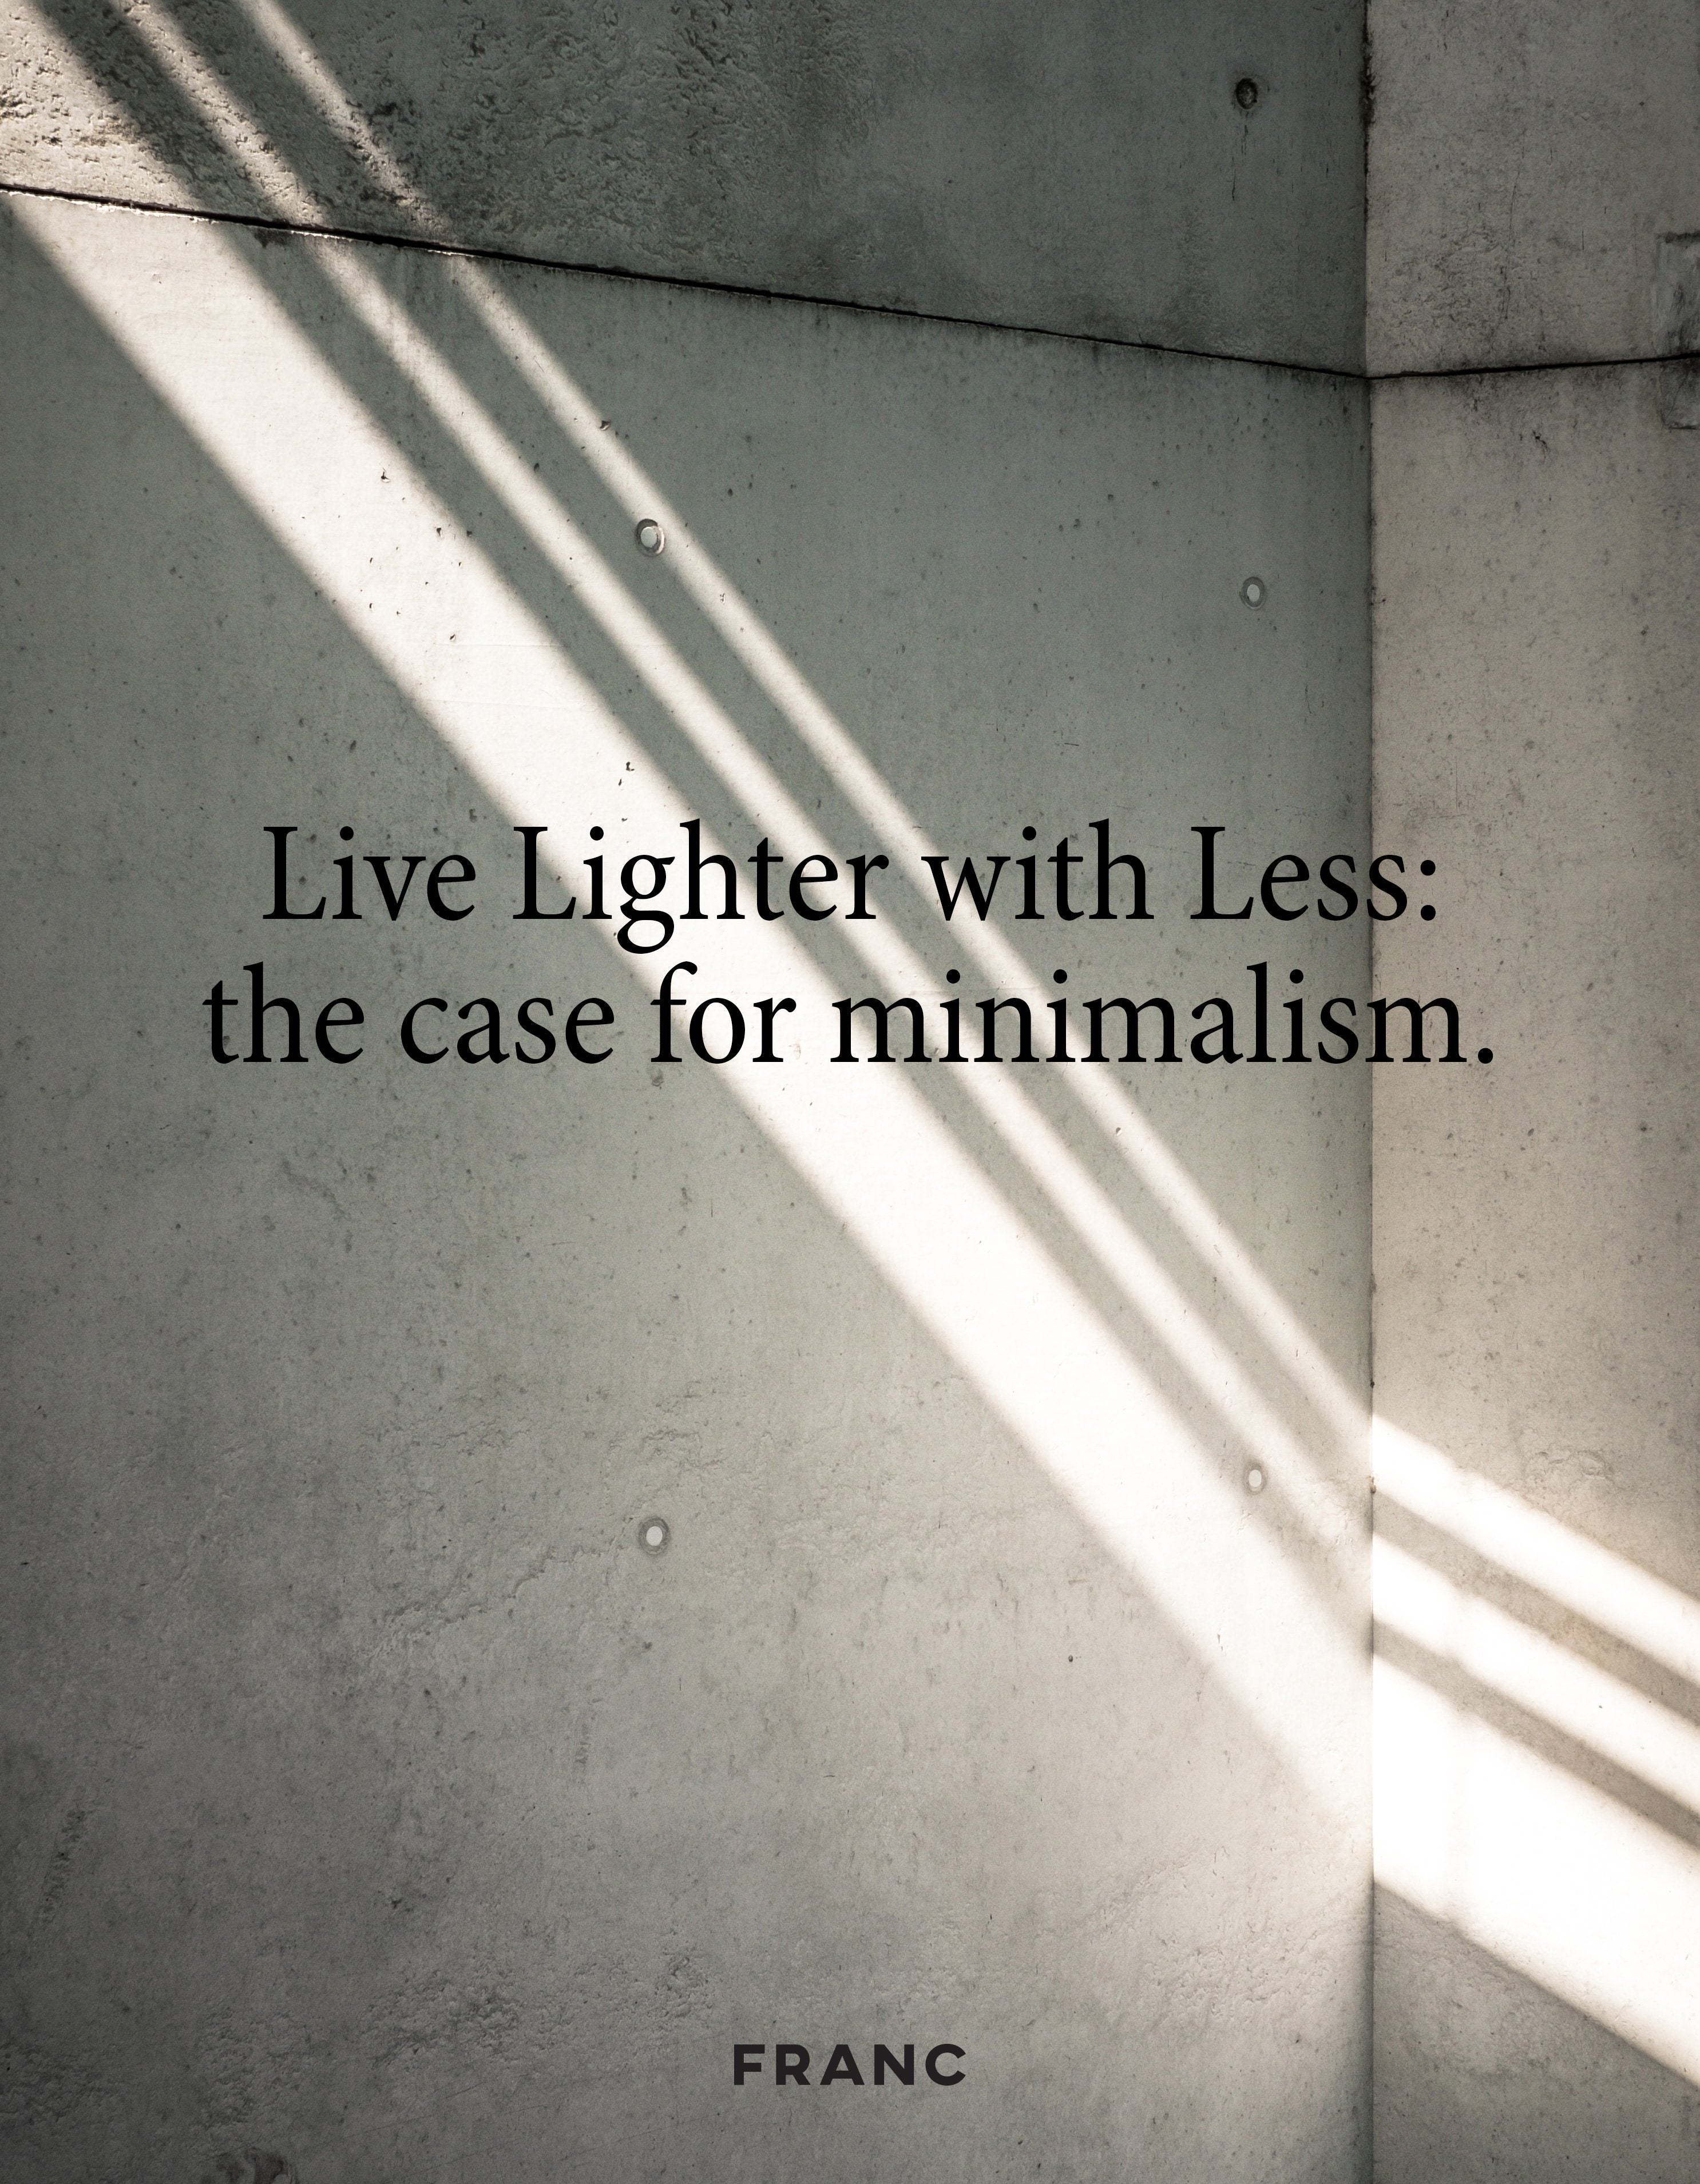 Live Lighter with Less: The Case for Minimalism - FRANC